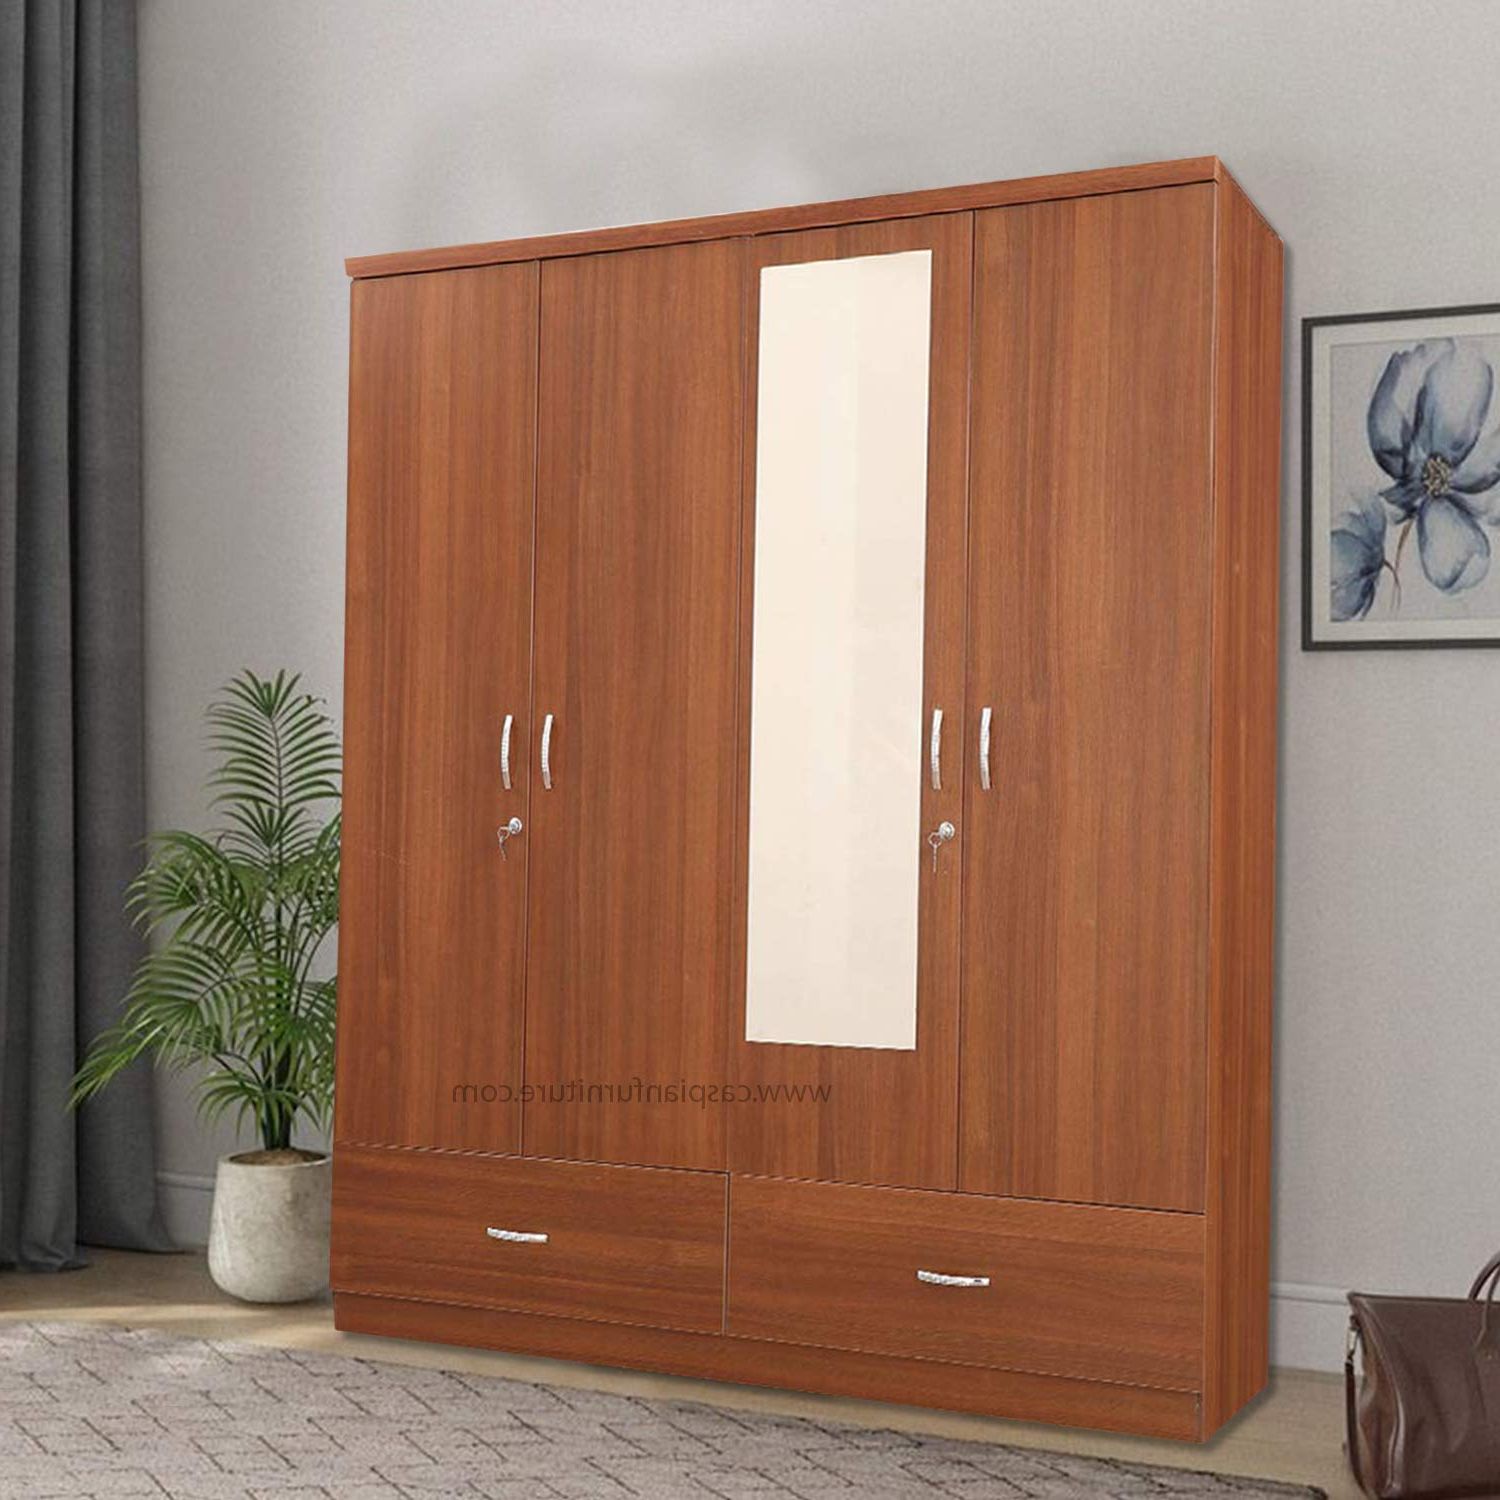 Lockable Almirah (light Brown) (75 X 60 X 19  Inches) : Amazon.in: Home & Kitchen (Photo 8 of 10)